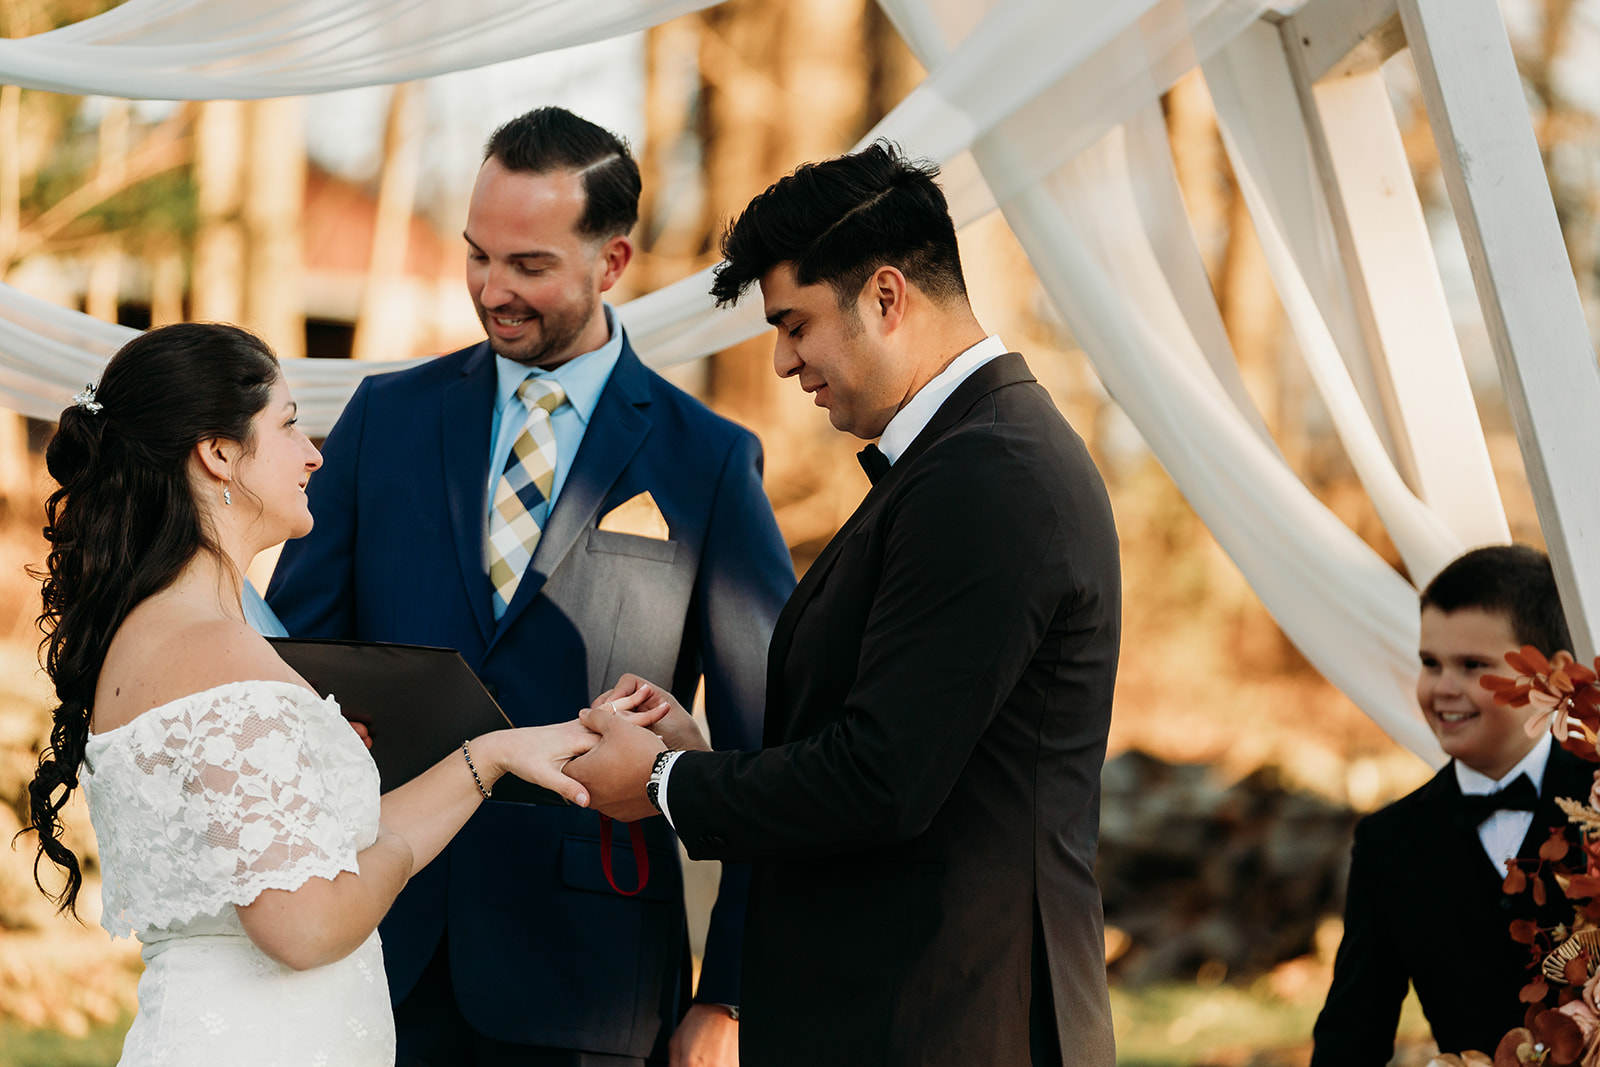 Capturing the warmth and love as the couple exchange vows in an intimate Connecticut setting